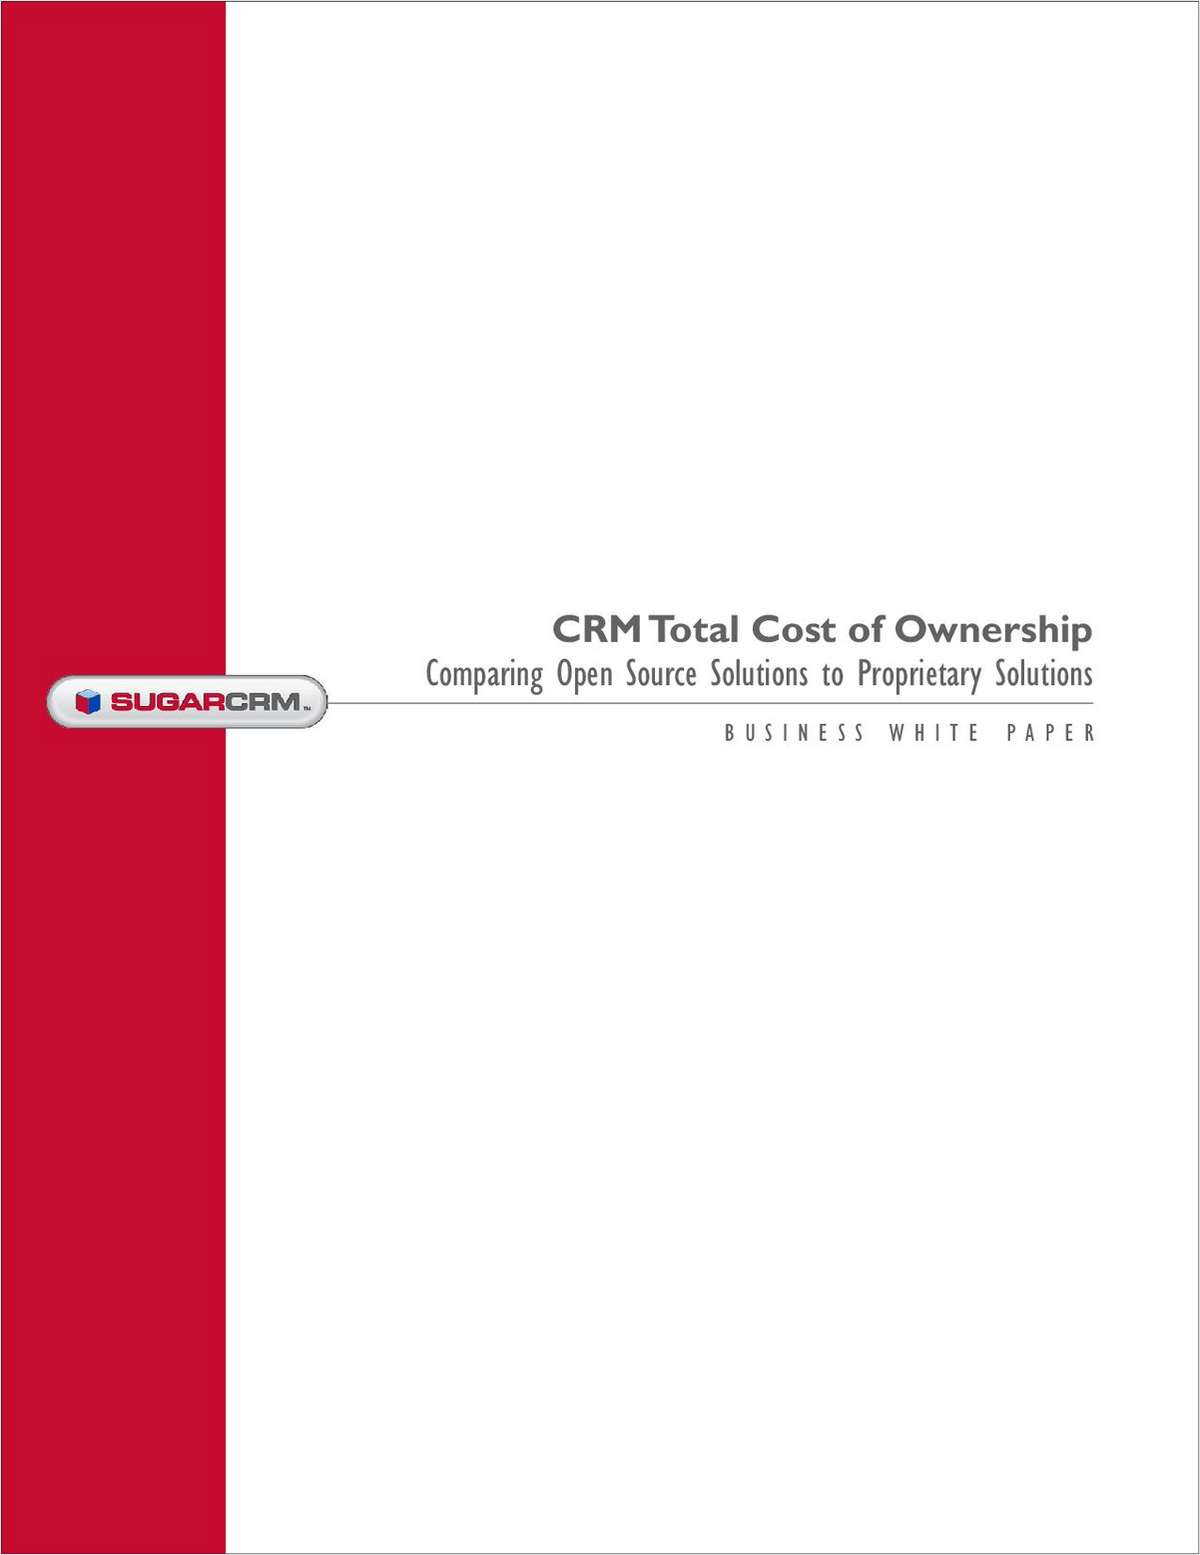 Business Strategy: CRM Total Cost of Ownership